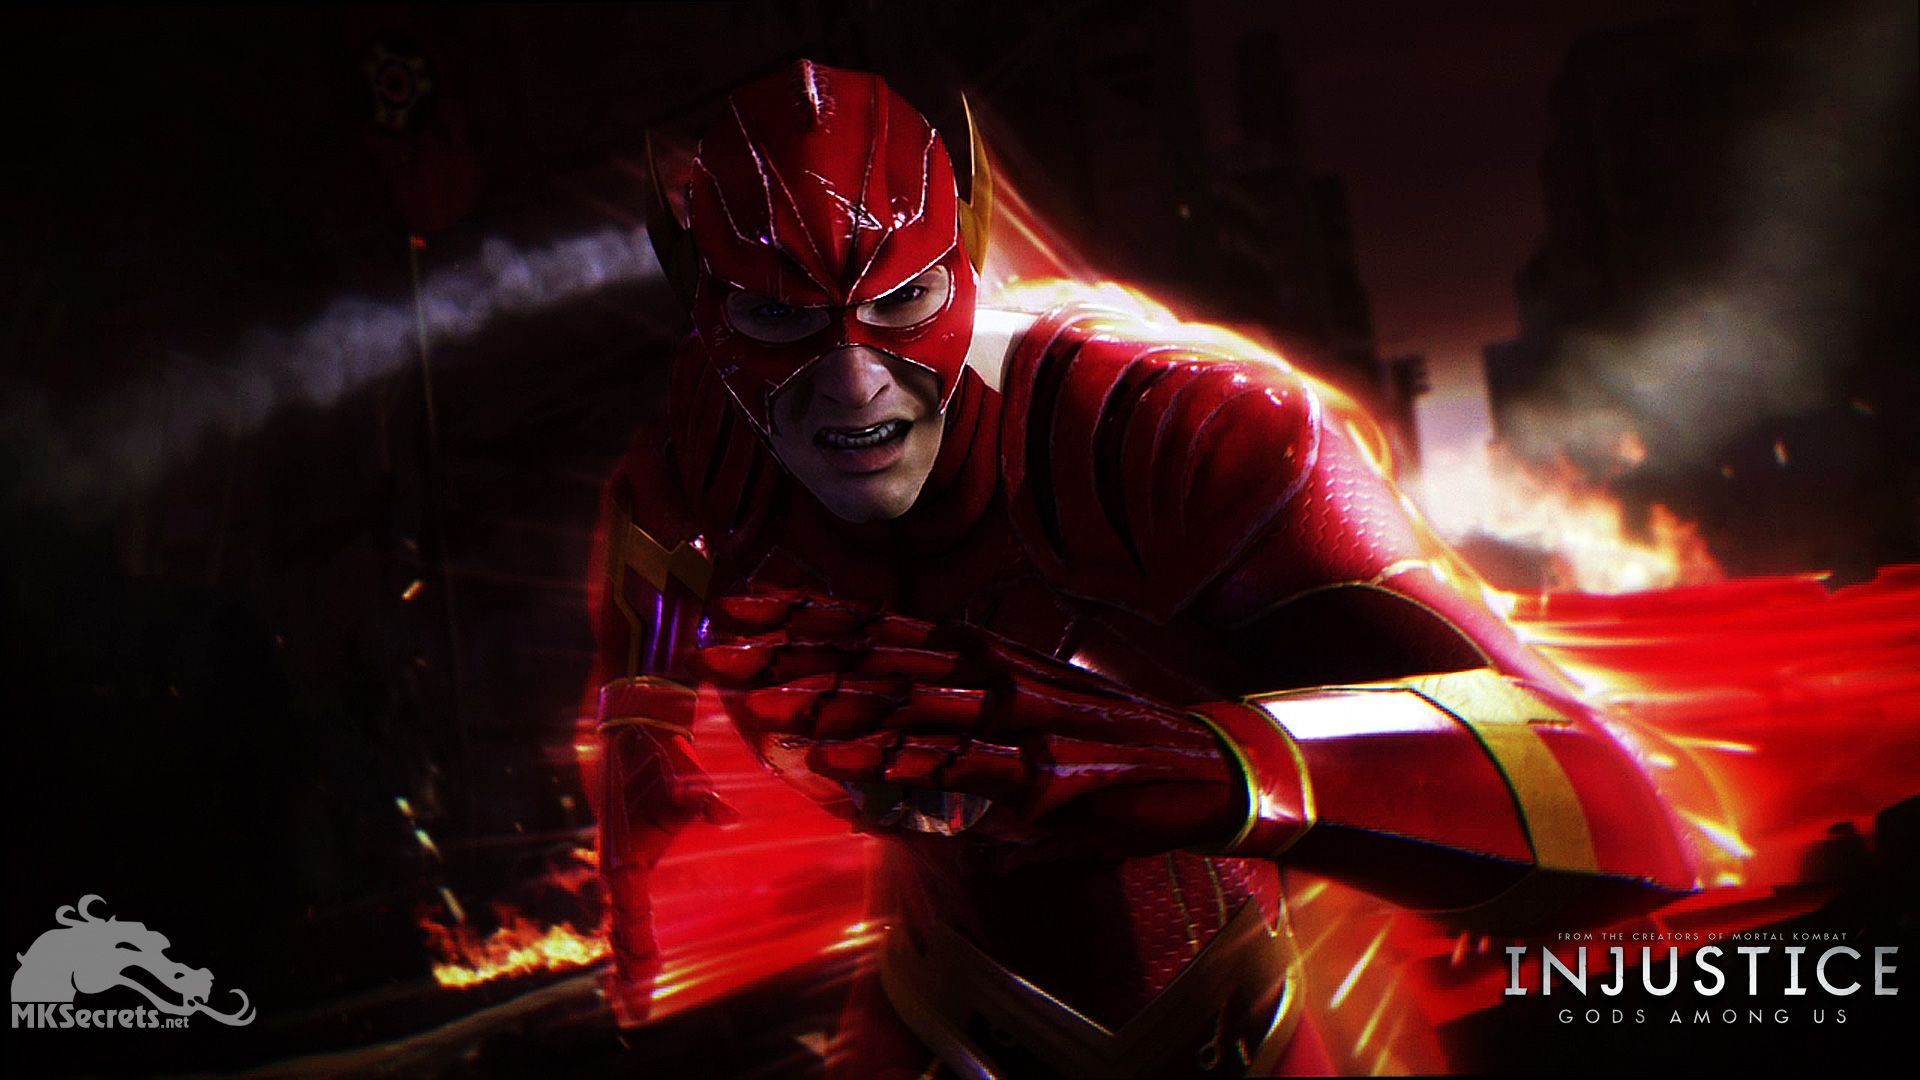 Injustice: Gods Among Us Wallpapers | Injustice Online